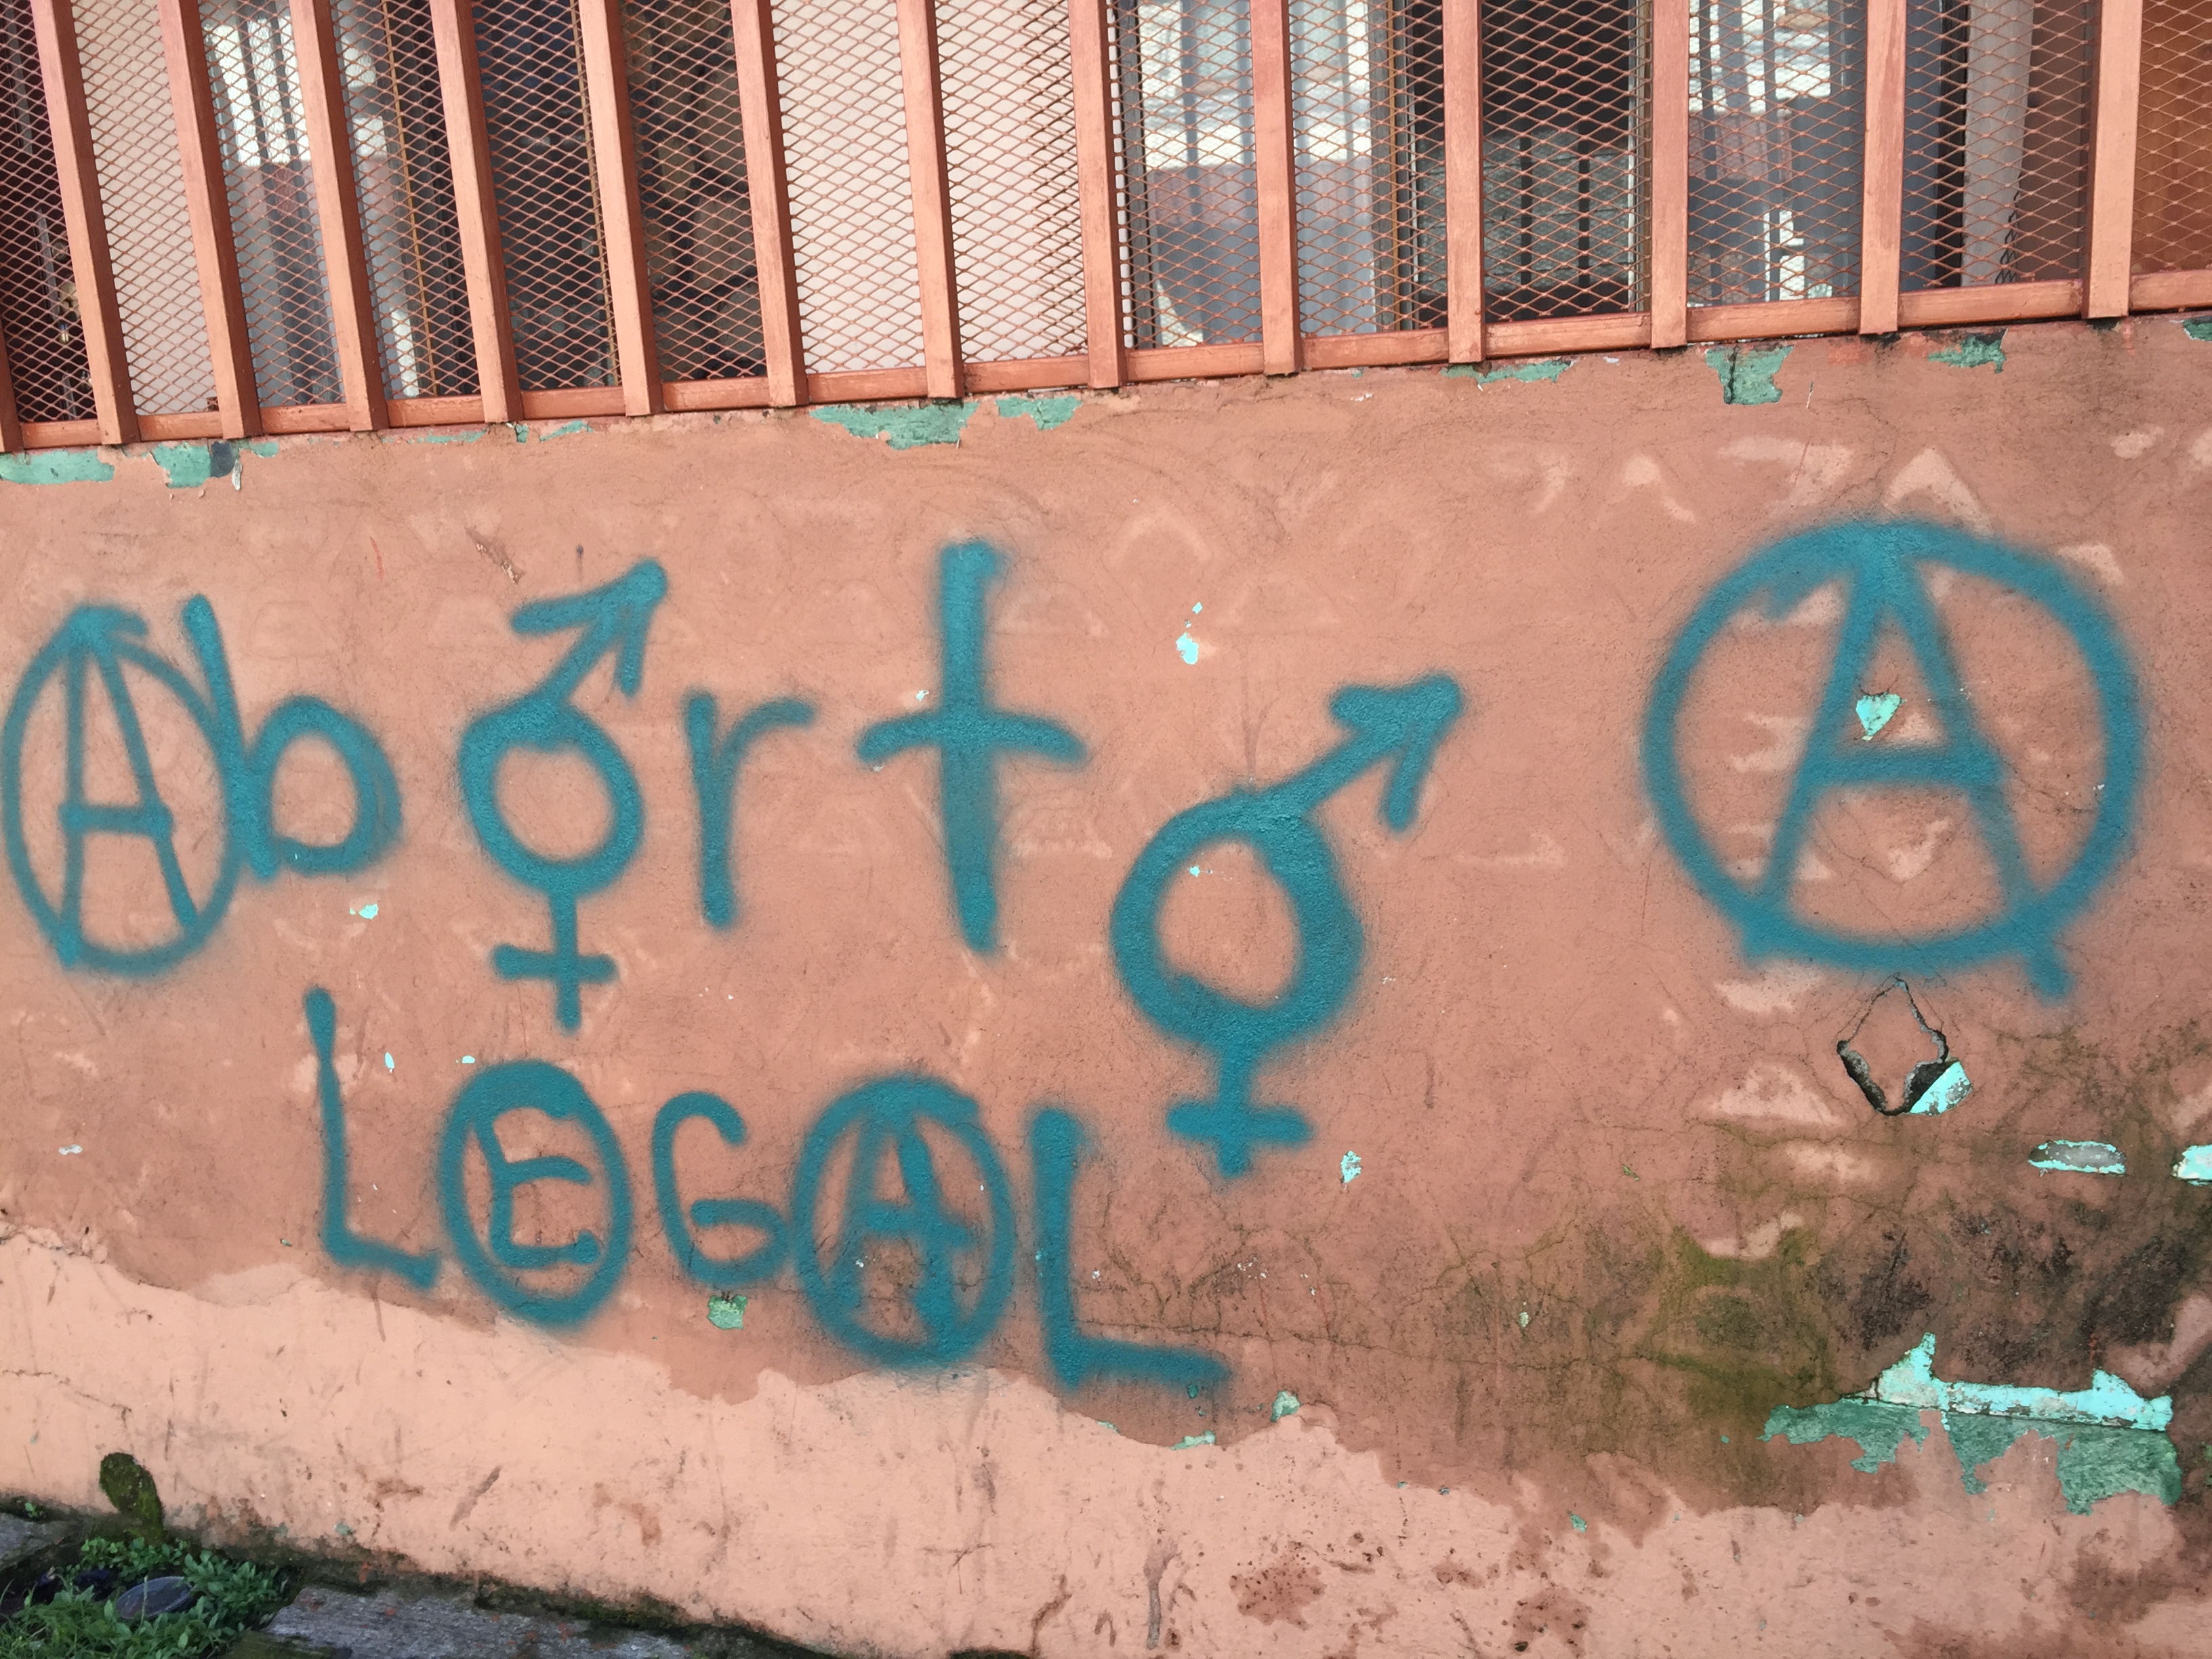 This is spray painted on a wall in Heredia Central. Abortion is illegal in Costa Rica. In 2007, it was reported that abortions preformed secretly rose from 22.3 for every 1,000 from 10.6 for every 1,000 women. Annually, this calculates to an estimation of 27,000  abortions being performed illegally in Costa Rica annually. 